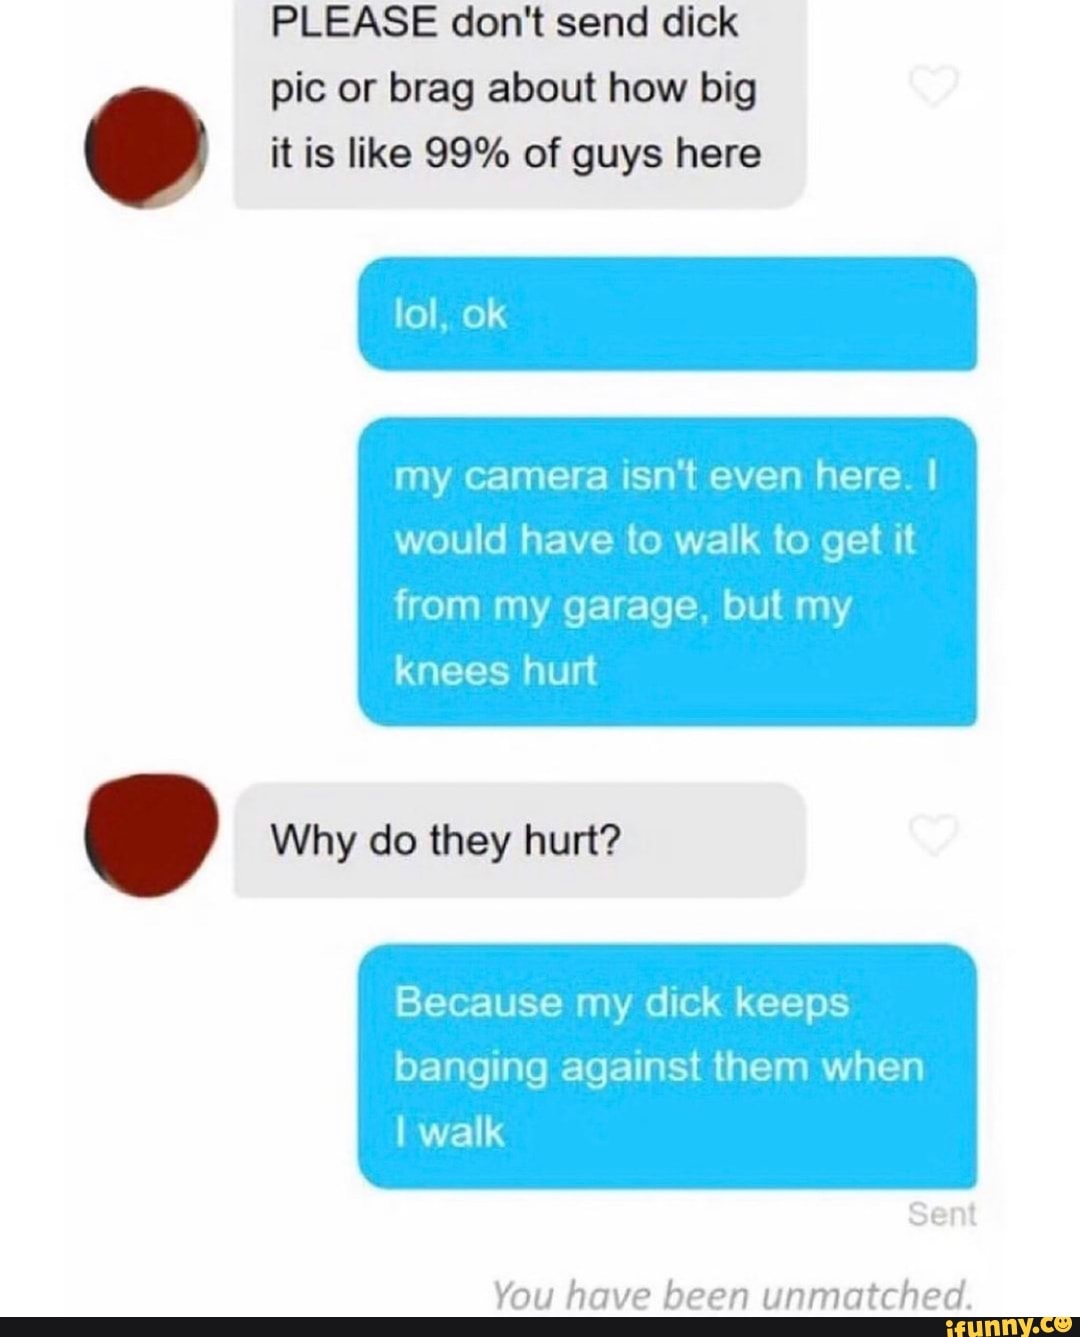 When a guy sends a dick video